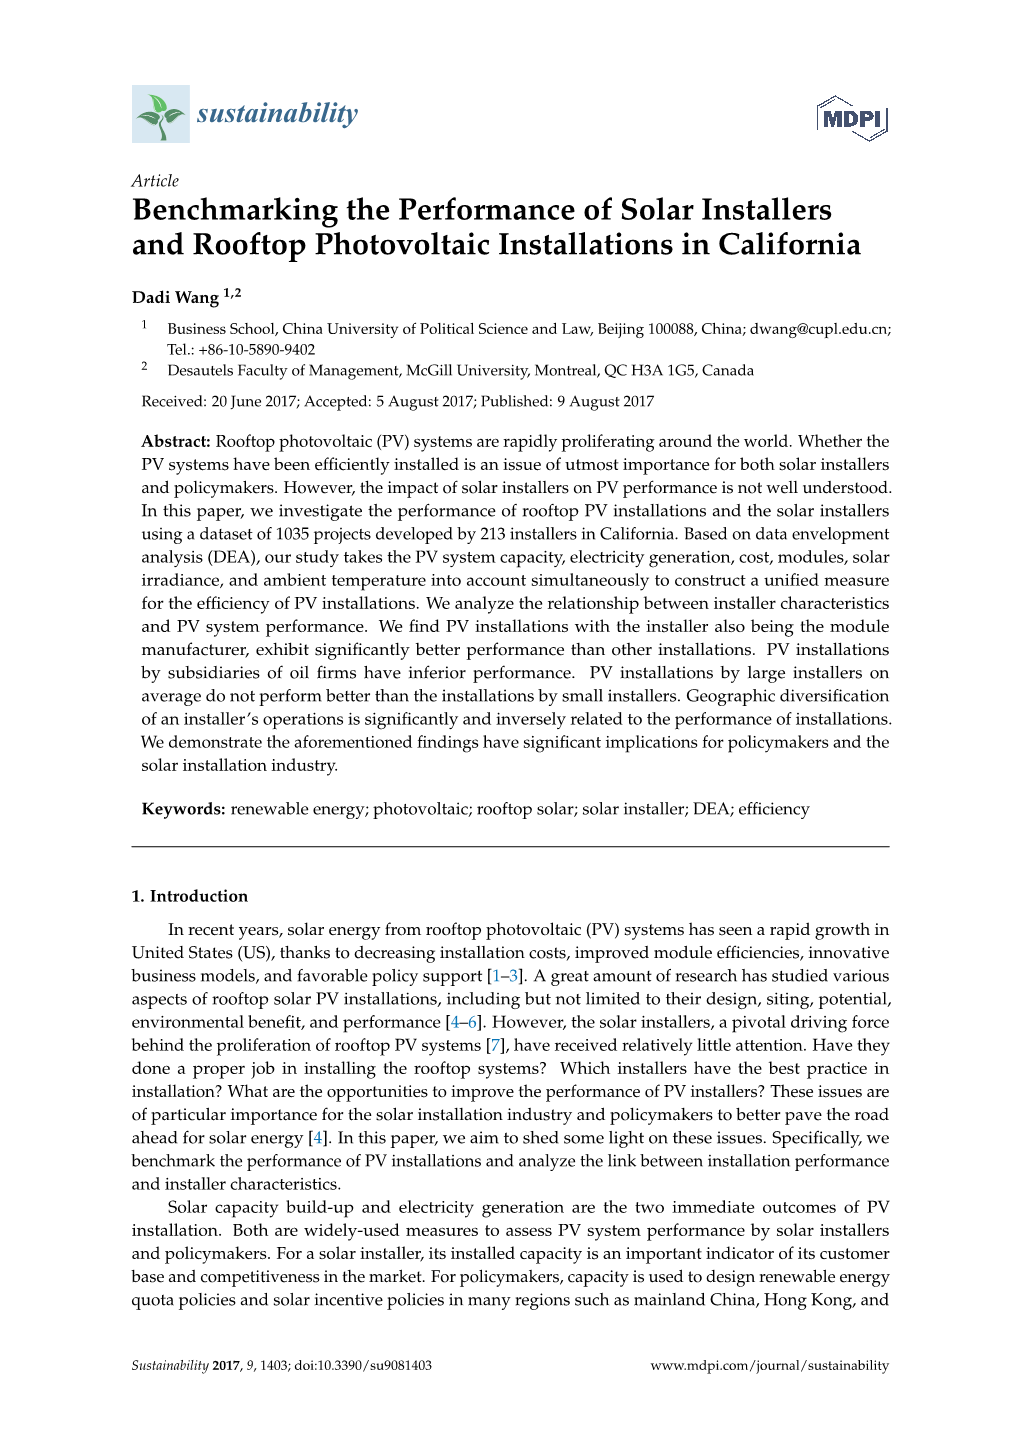 Benchmarking the Performance of Solar Installers and Rooftop Photovoltaic Installations in California